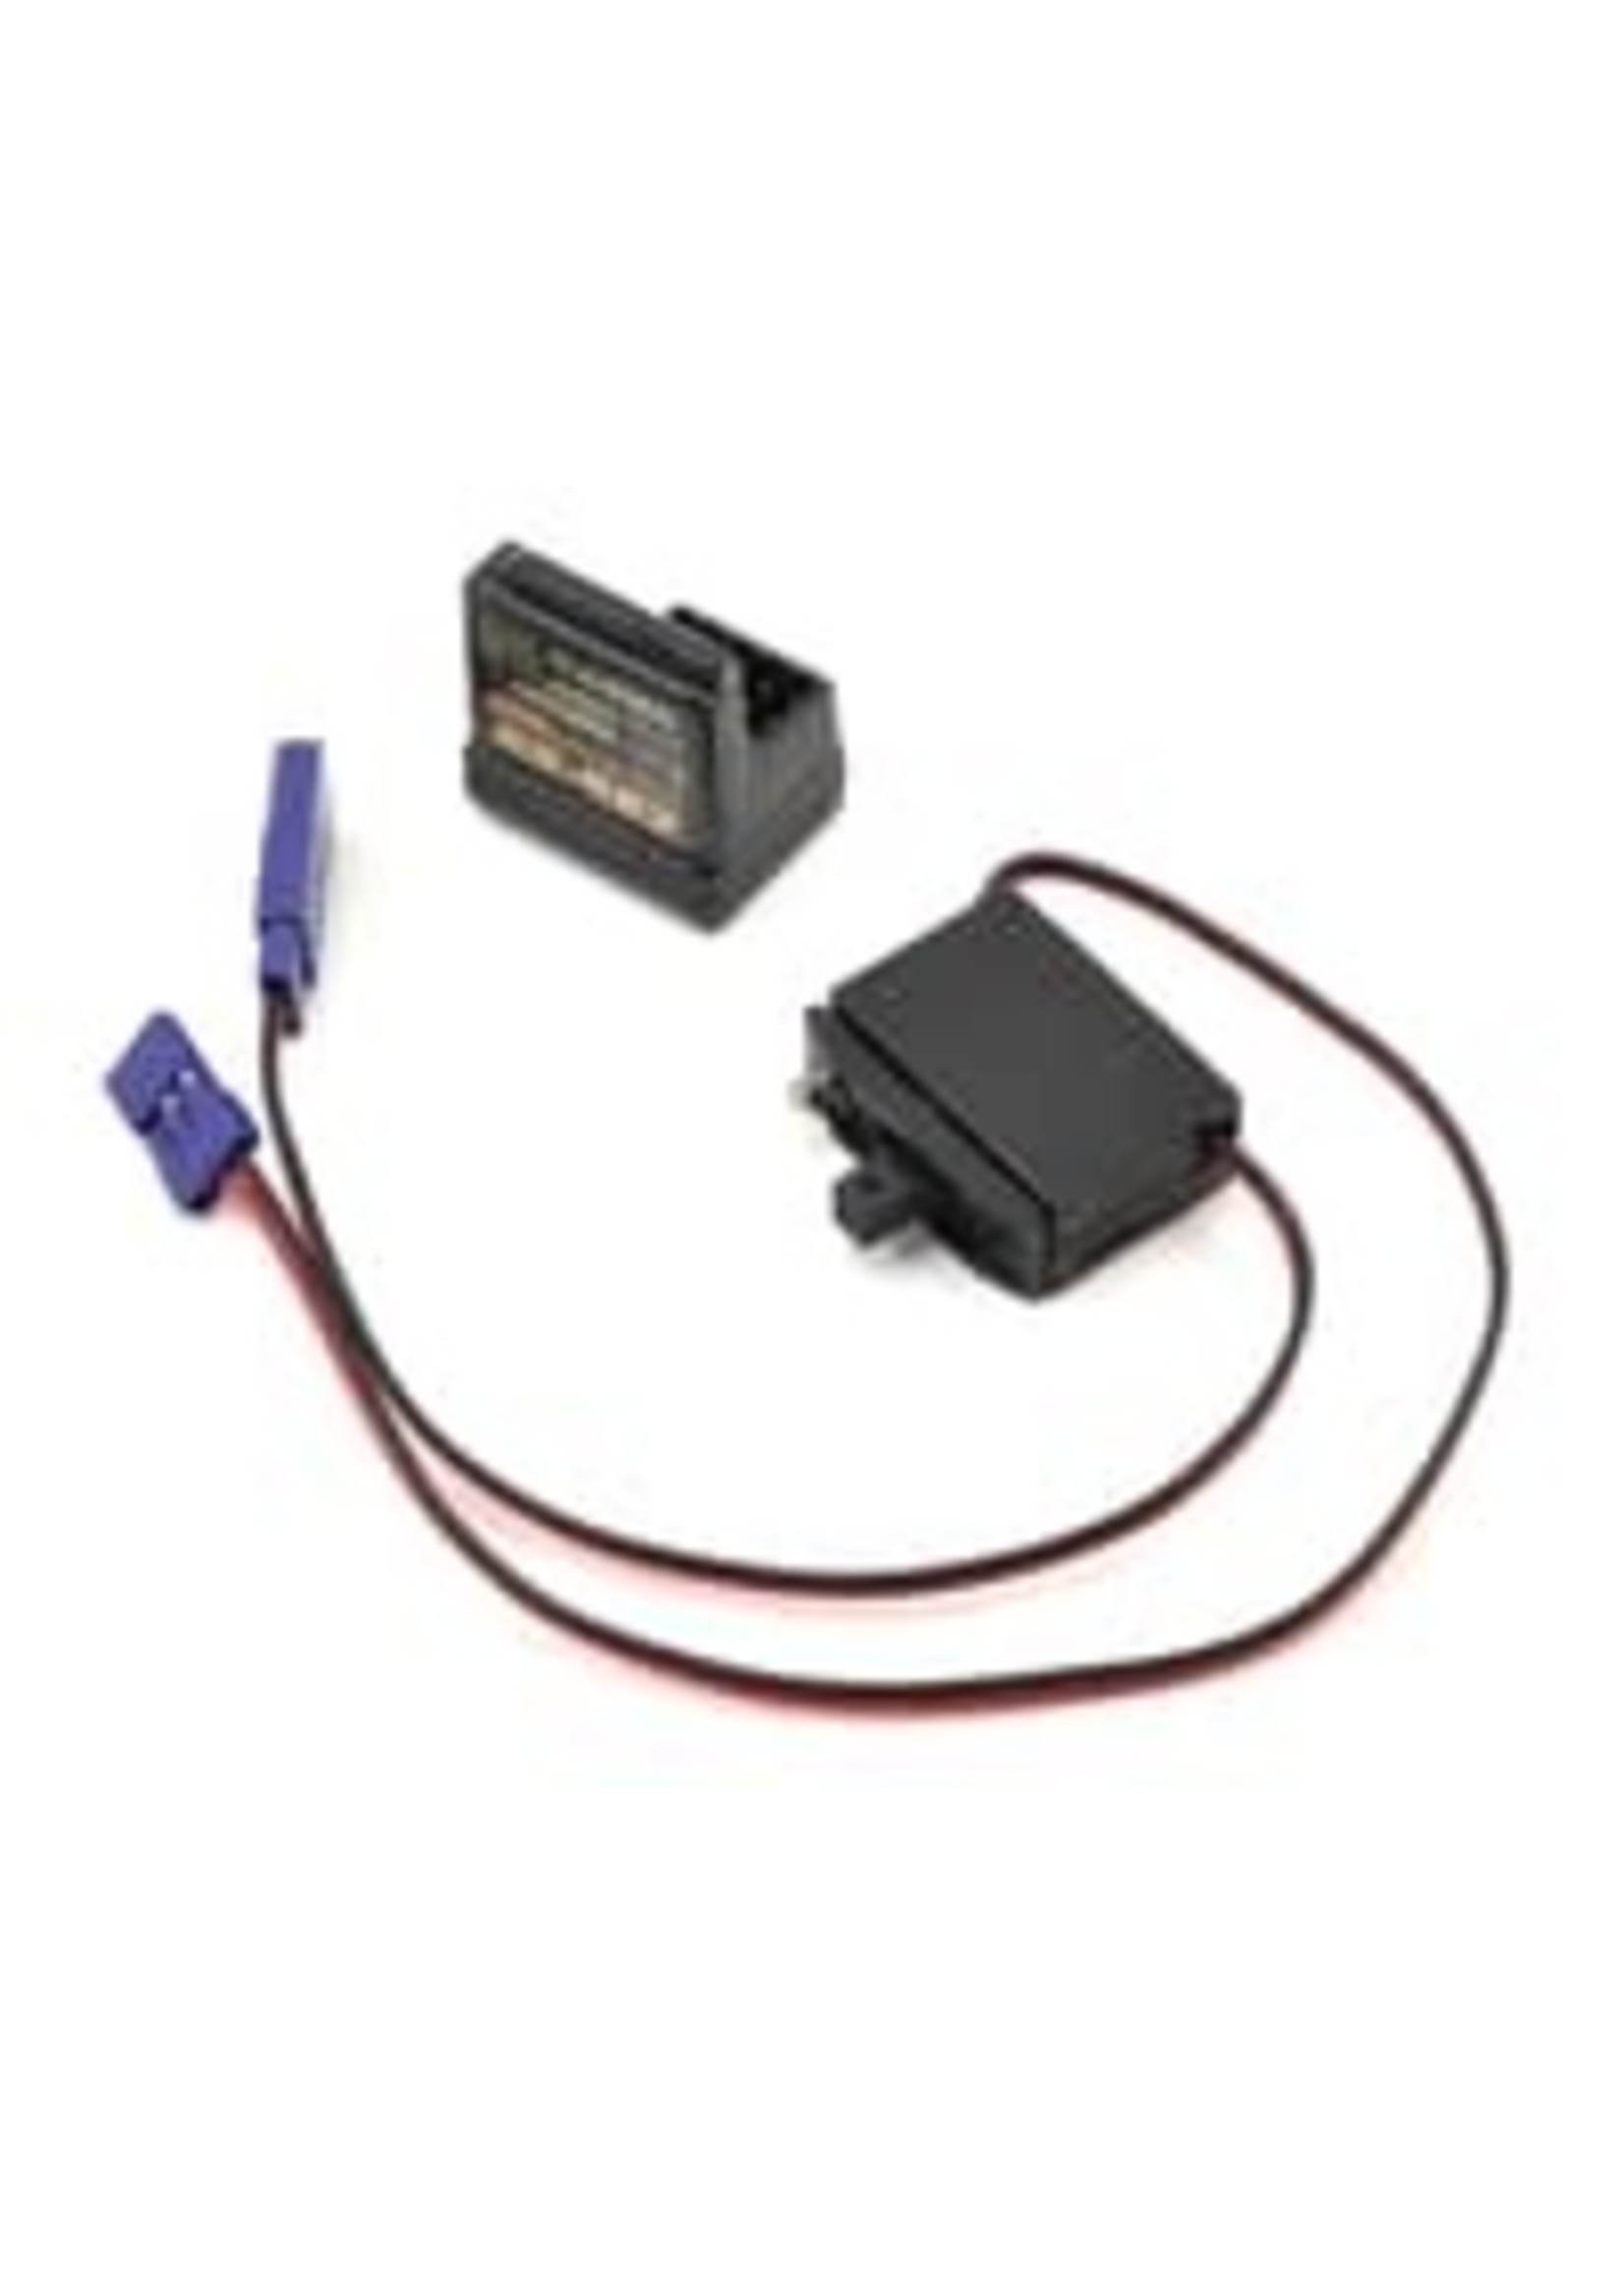 Sanwa/Airtronics SNW101A32161A Sanwa/Airtronics MT-44 FH4T/FH3 4-Channel 2.4GHz Radio System